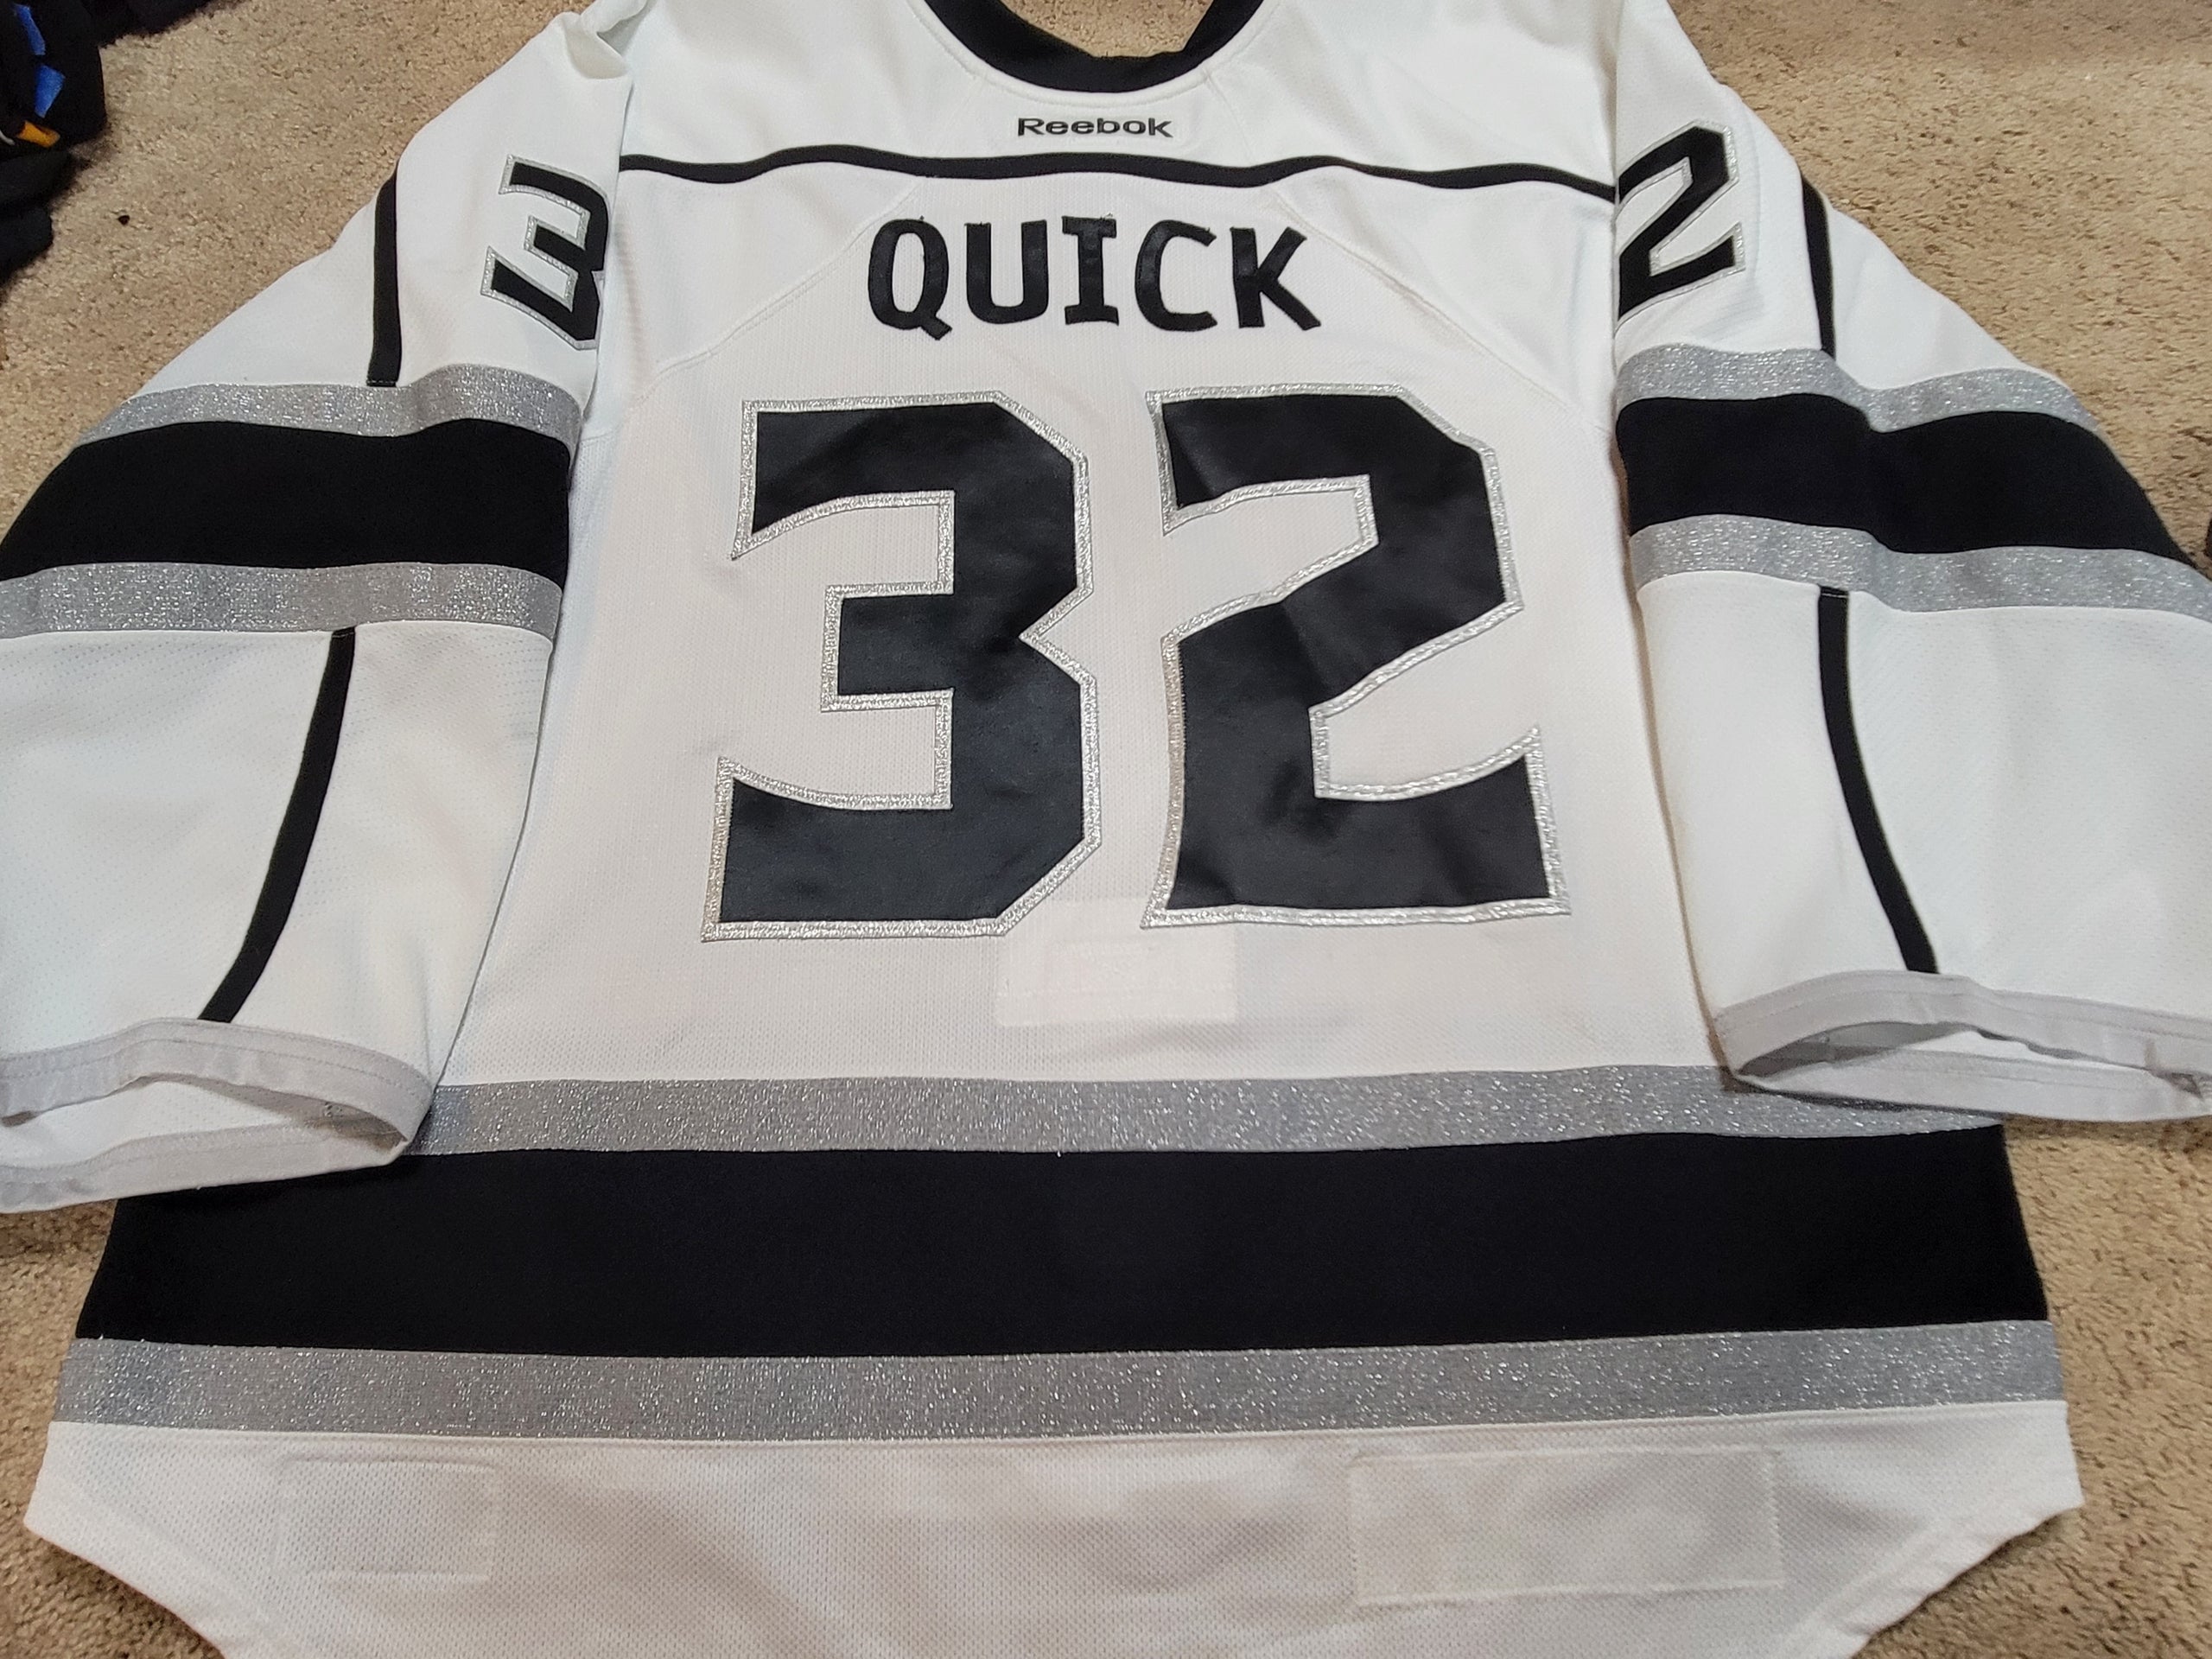 🔴SOLD🔴 Los Angeles Kings 2020 NHL Stadium Series Adidas Hockey Jersey -  Jonathan Quick New with tags Size 46 #LAK #LAKings…